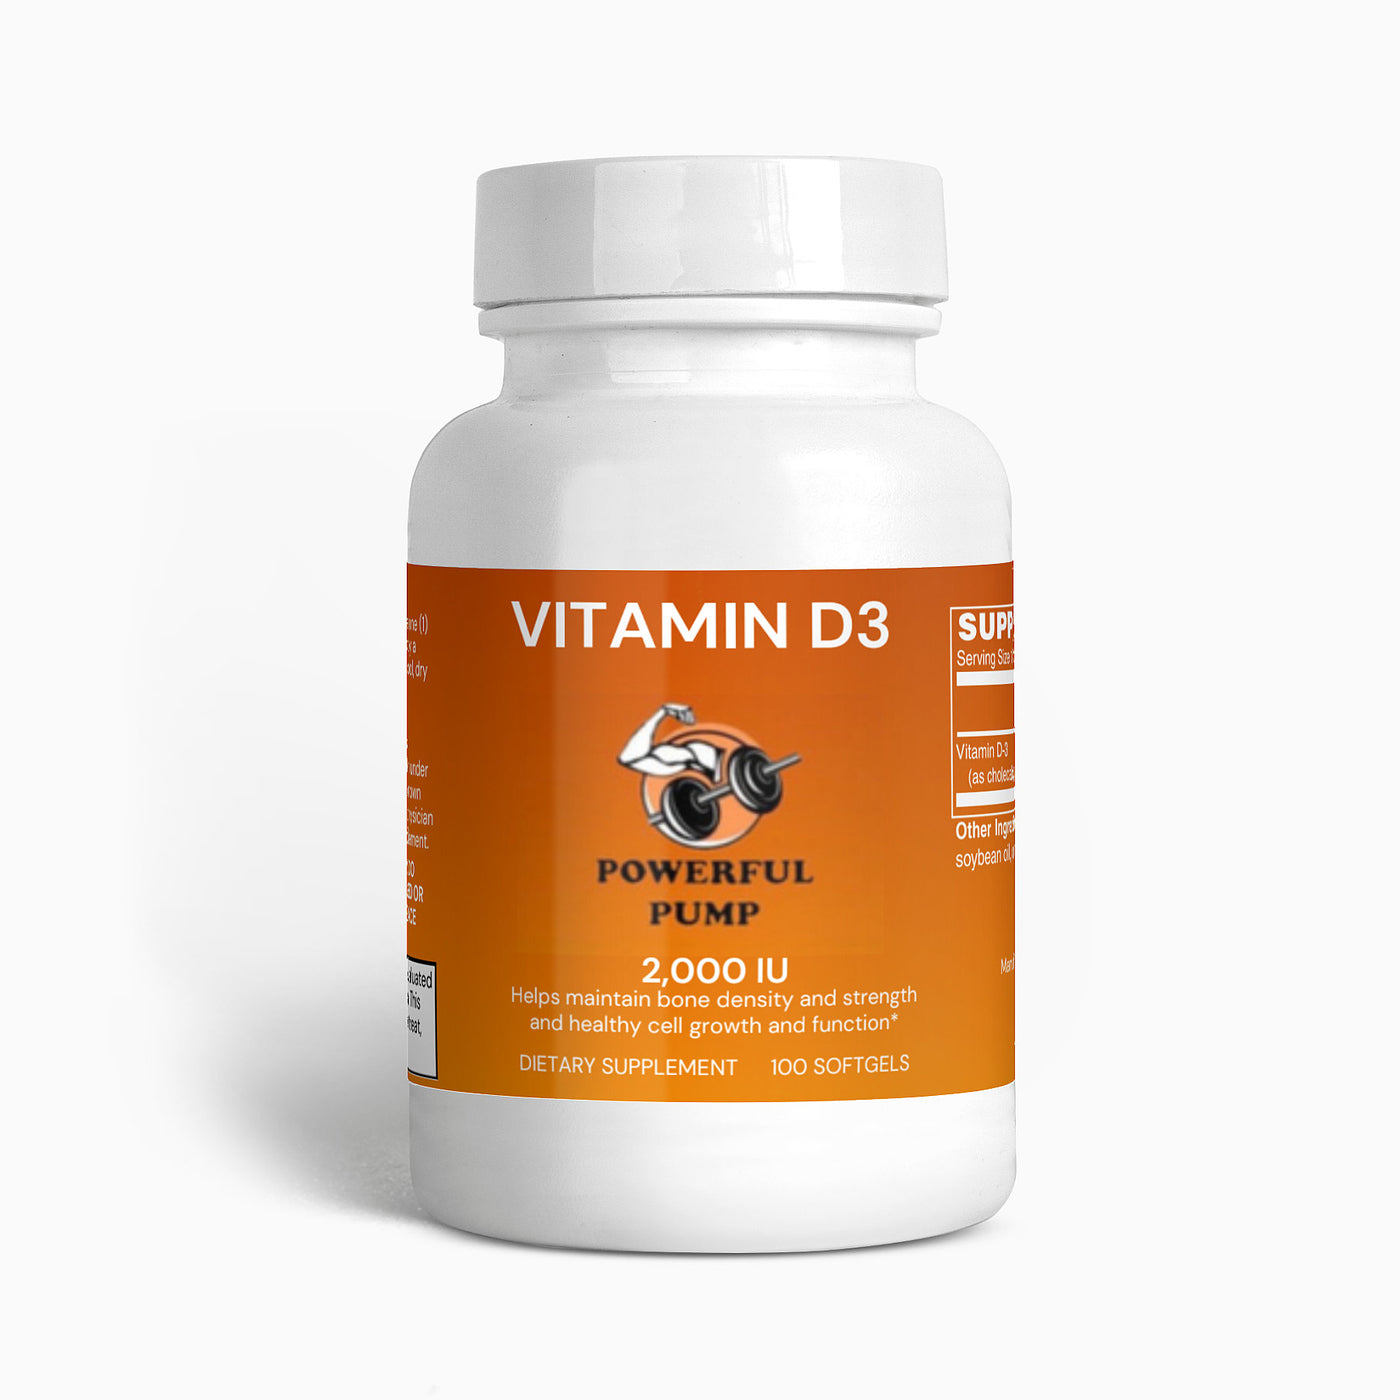 Vitamin D3 2,000 IU supplement - Essential for bone health, immune support, and overall well-being.